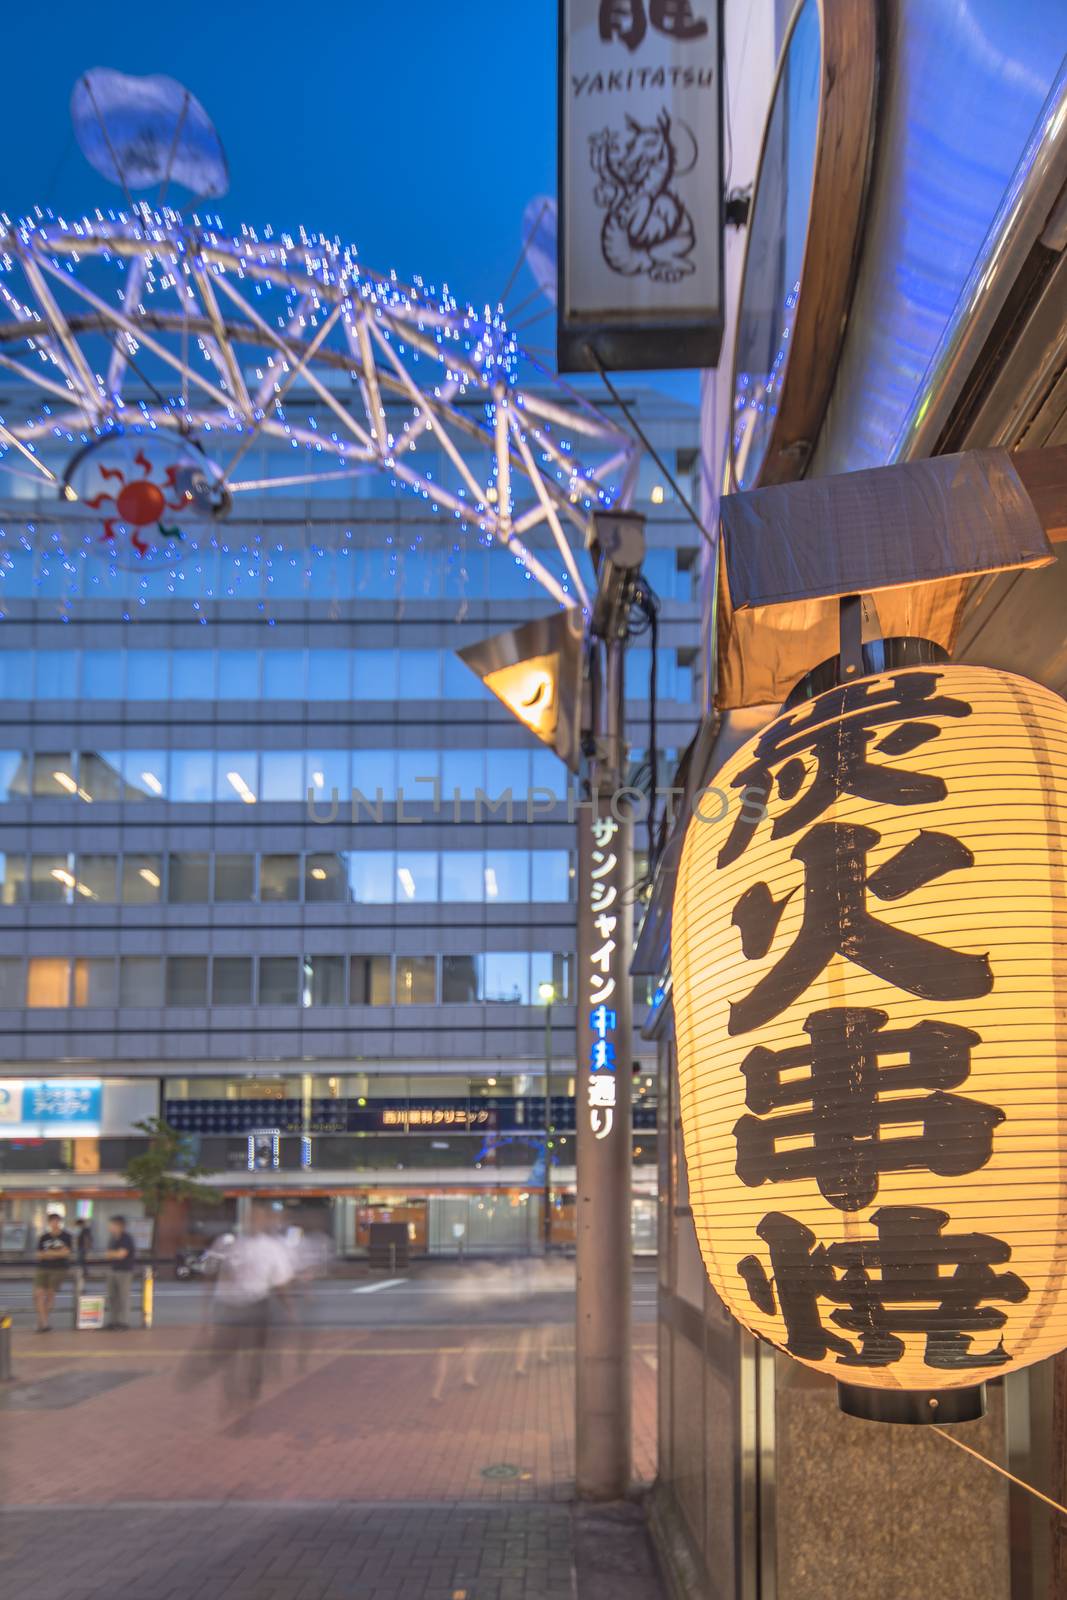 Illuminated entrance gate of the Sunshine Central Street connecting the east exit of Ikebukuro station lines with yakitori and sushi restaurants, shops, game center and cinemas leading to the famous otaku's town otome road.